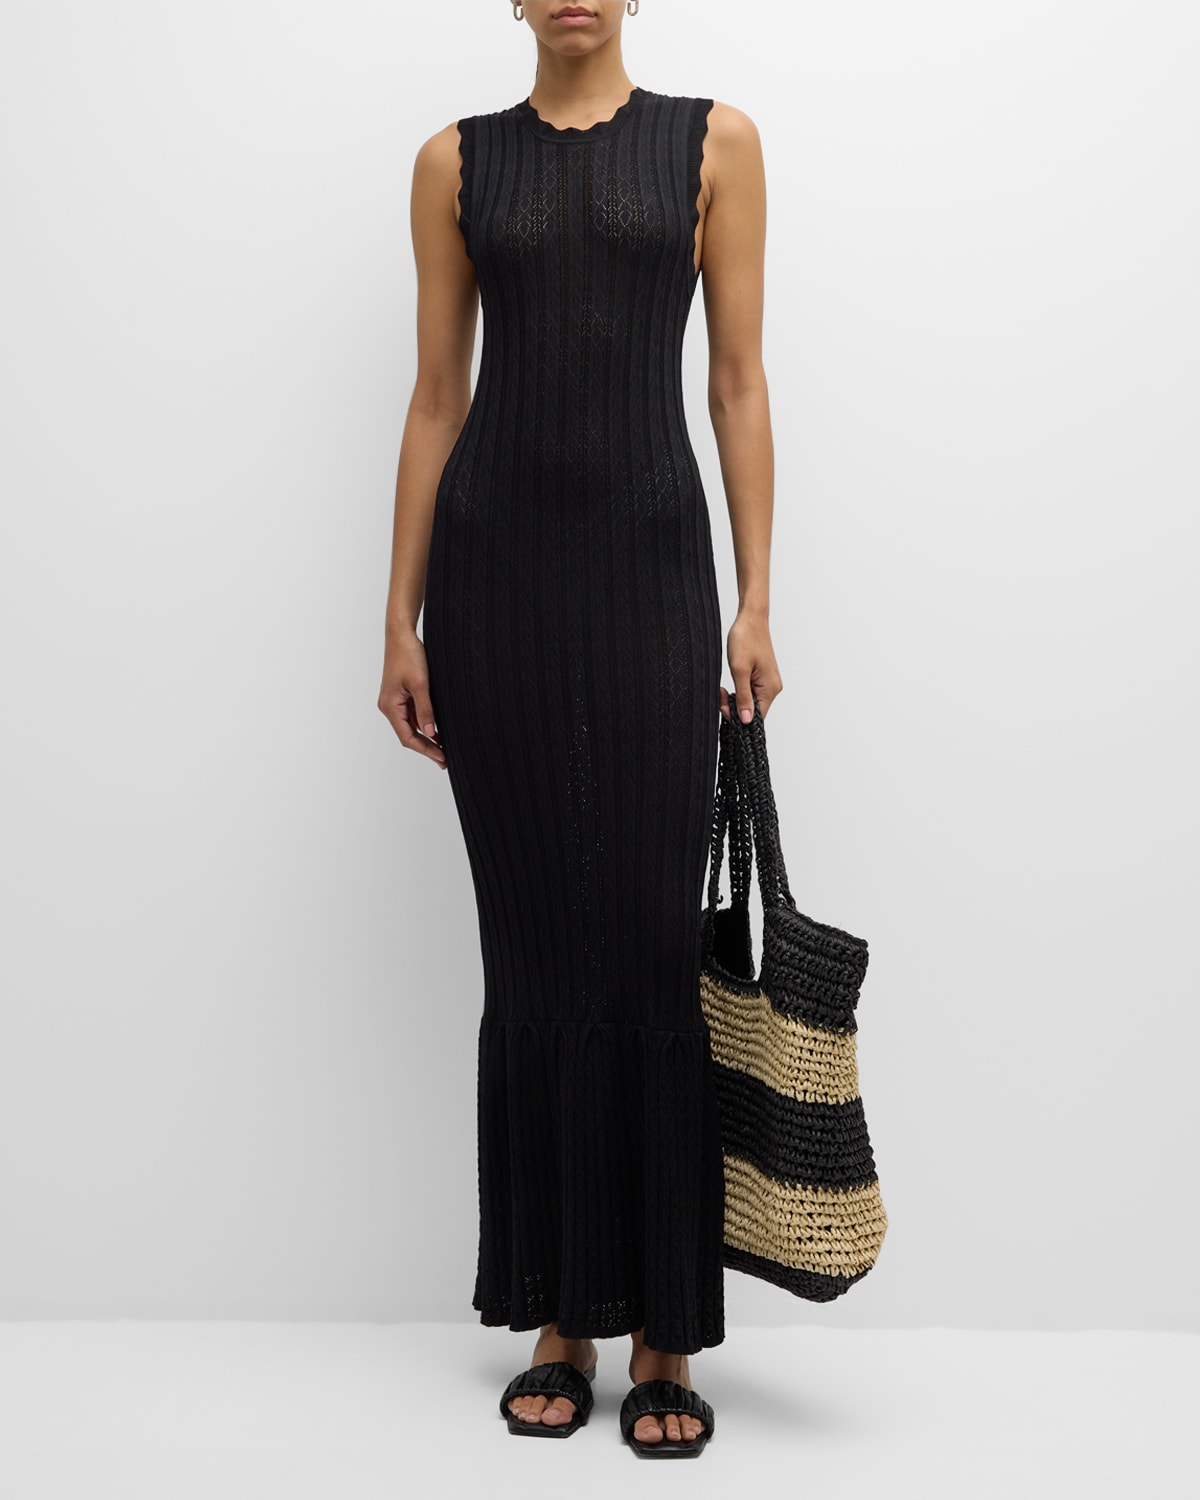 Crochet Knit Maxi Dress with Scalloped Trim